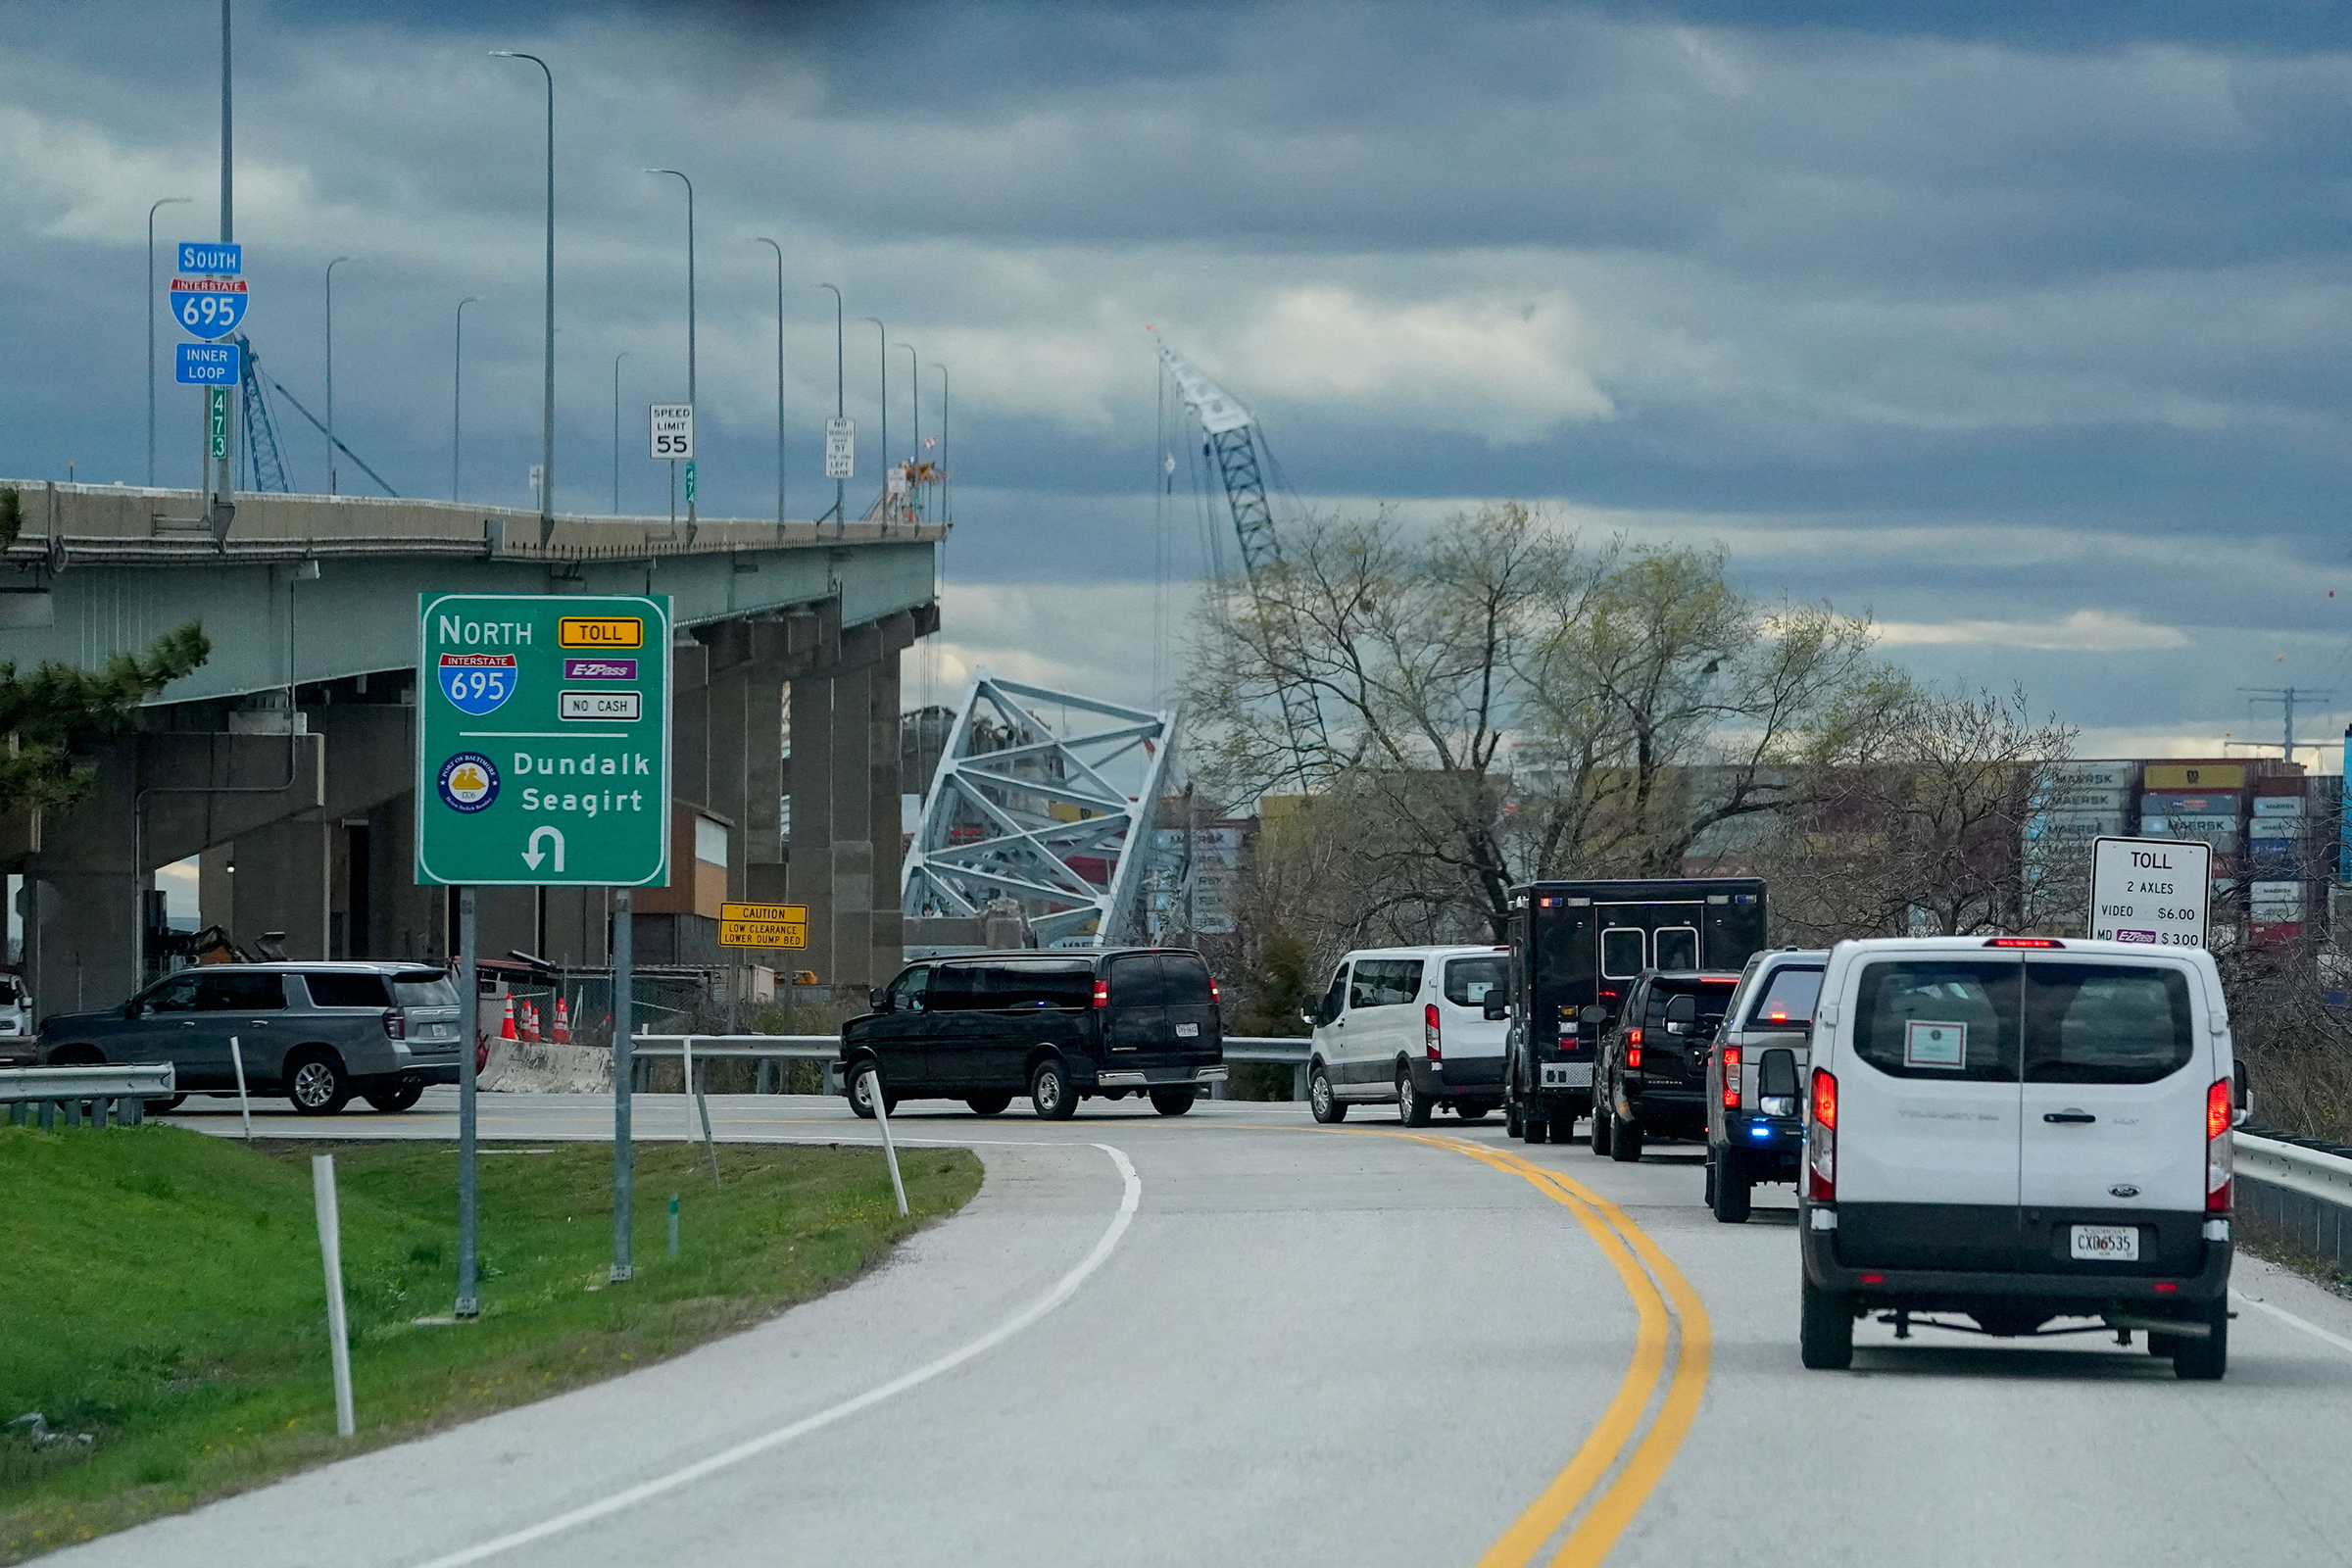 Vehicles that are part of the motorcade of President Joe Biden drive near the collapsed Francis Scott Key Bridge, in Dundalk, Maryland, on Friday.